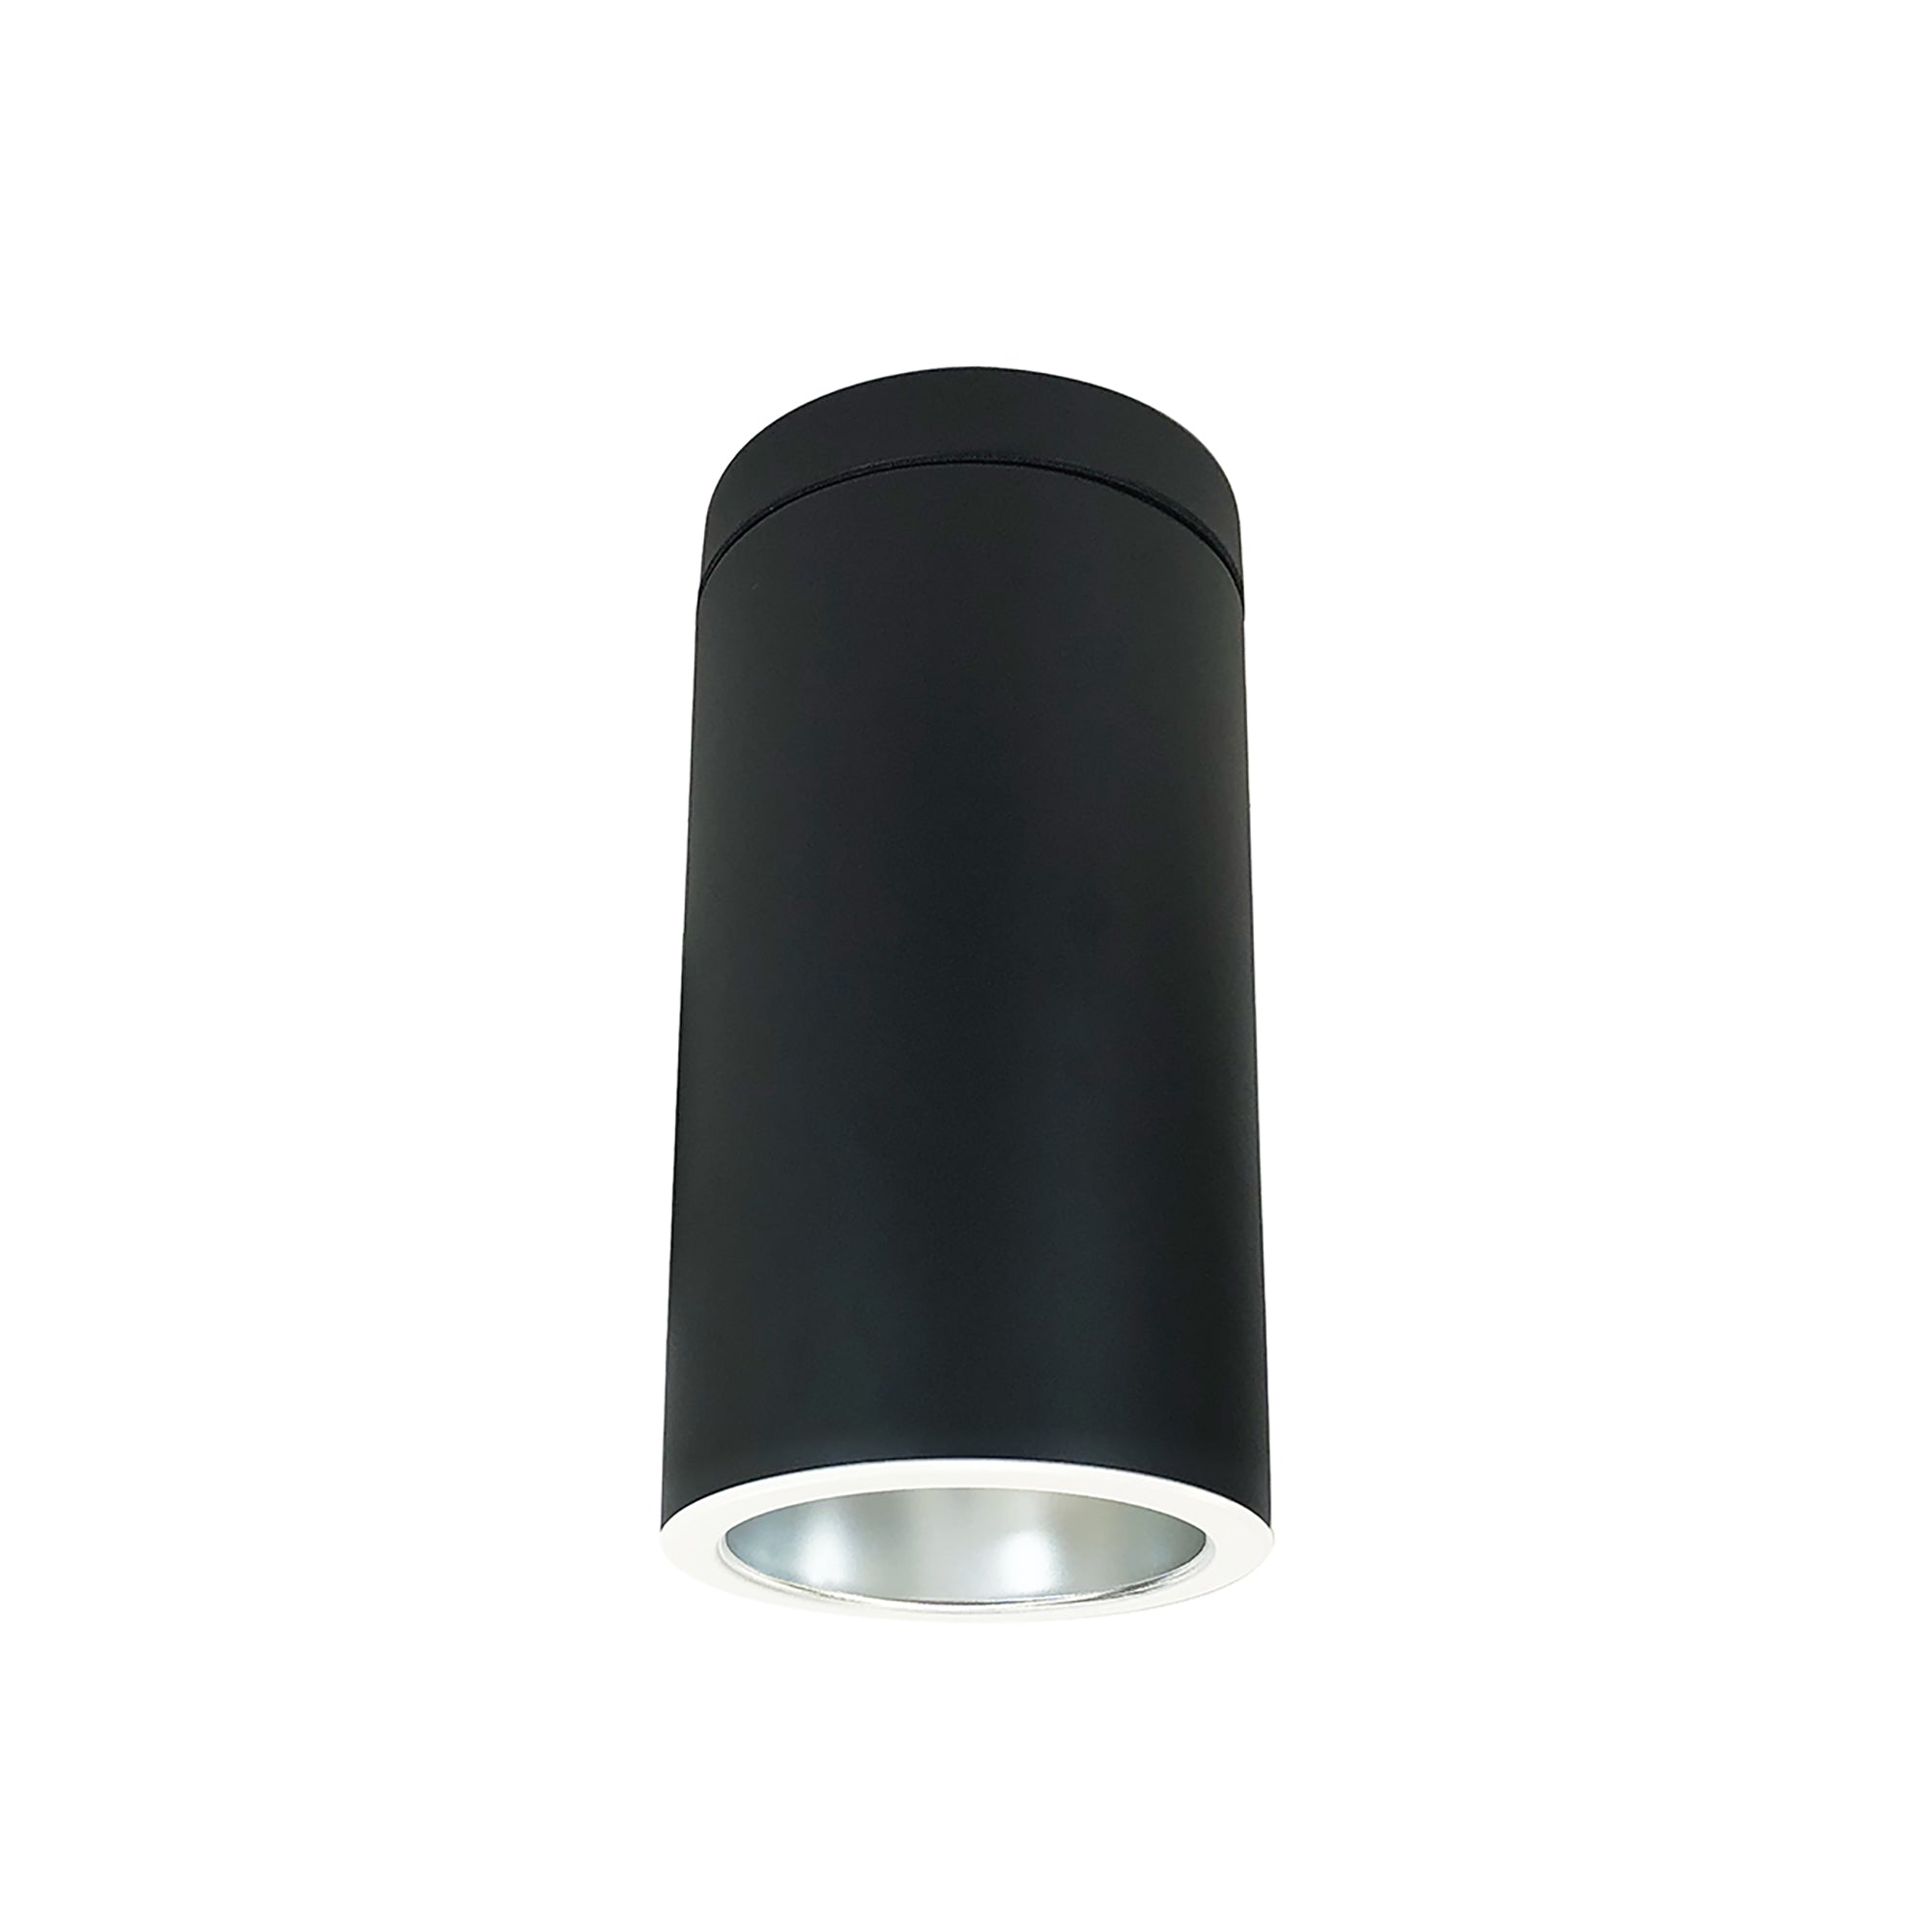 Nora Lighting NYLS2-6S15130SDWB6 - Cylinder - 6 Inch CYL SURFACE 1500LM REF SPOT 30K DIFF/WHT BLK CYL 120-277 0-10V